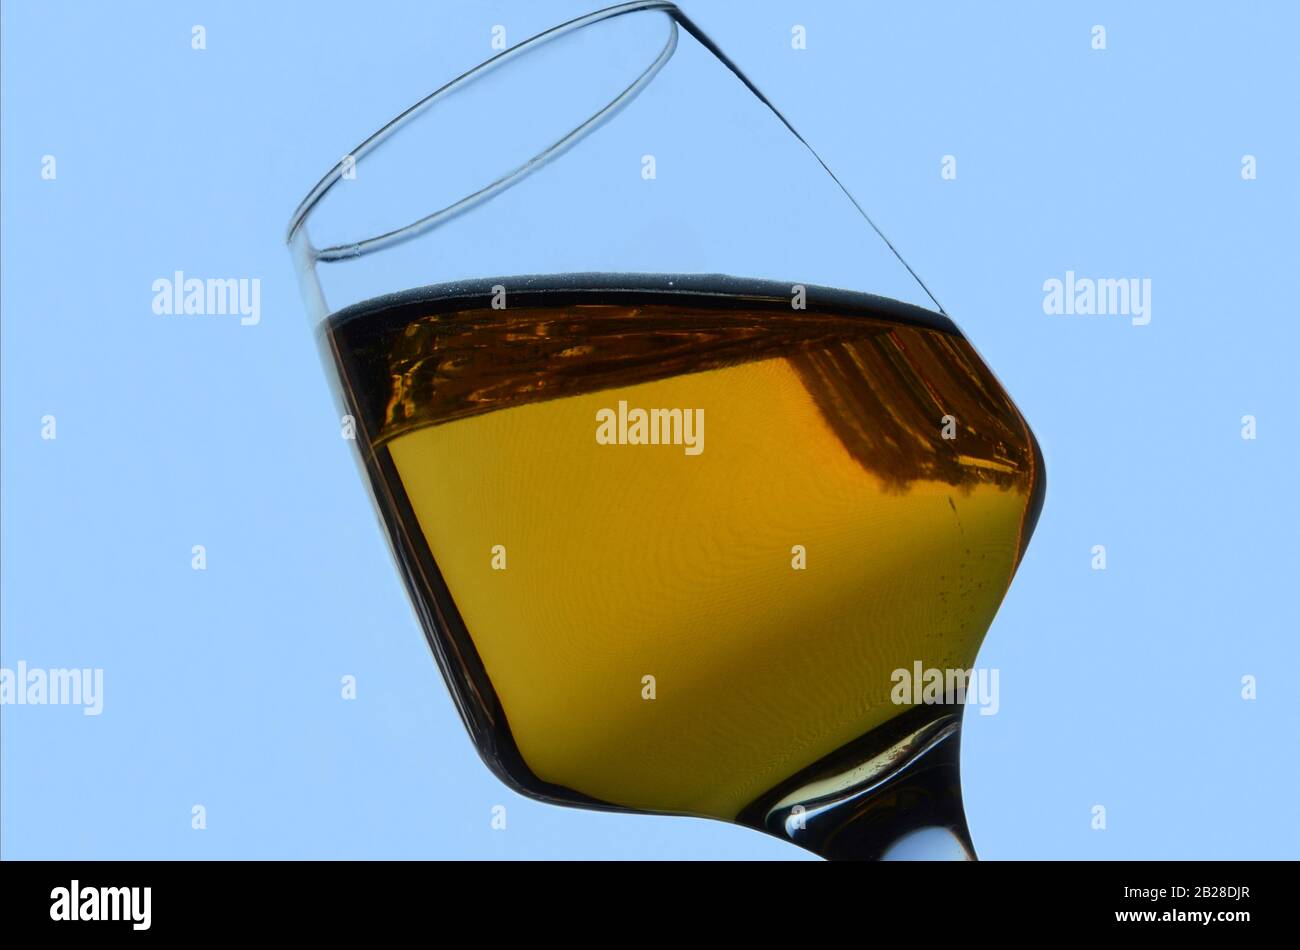 PENDULUM: A glass of beer undergoes an unusual gravitational transformation against a blue backdrop. Stock Photo